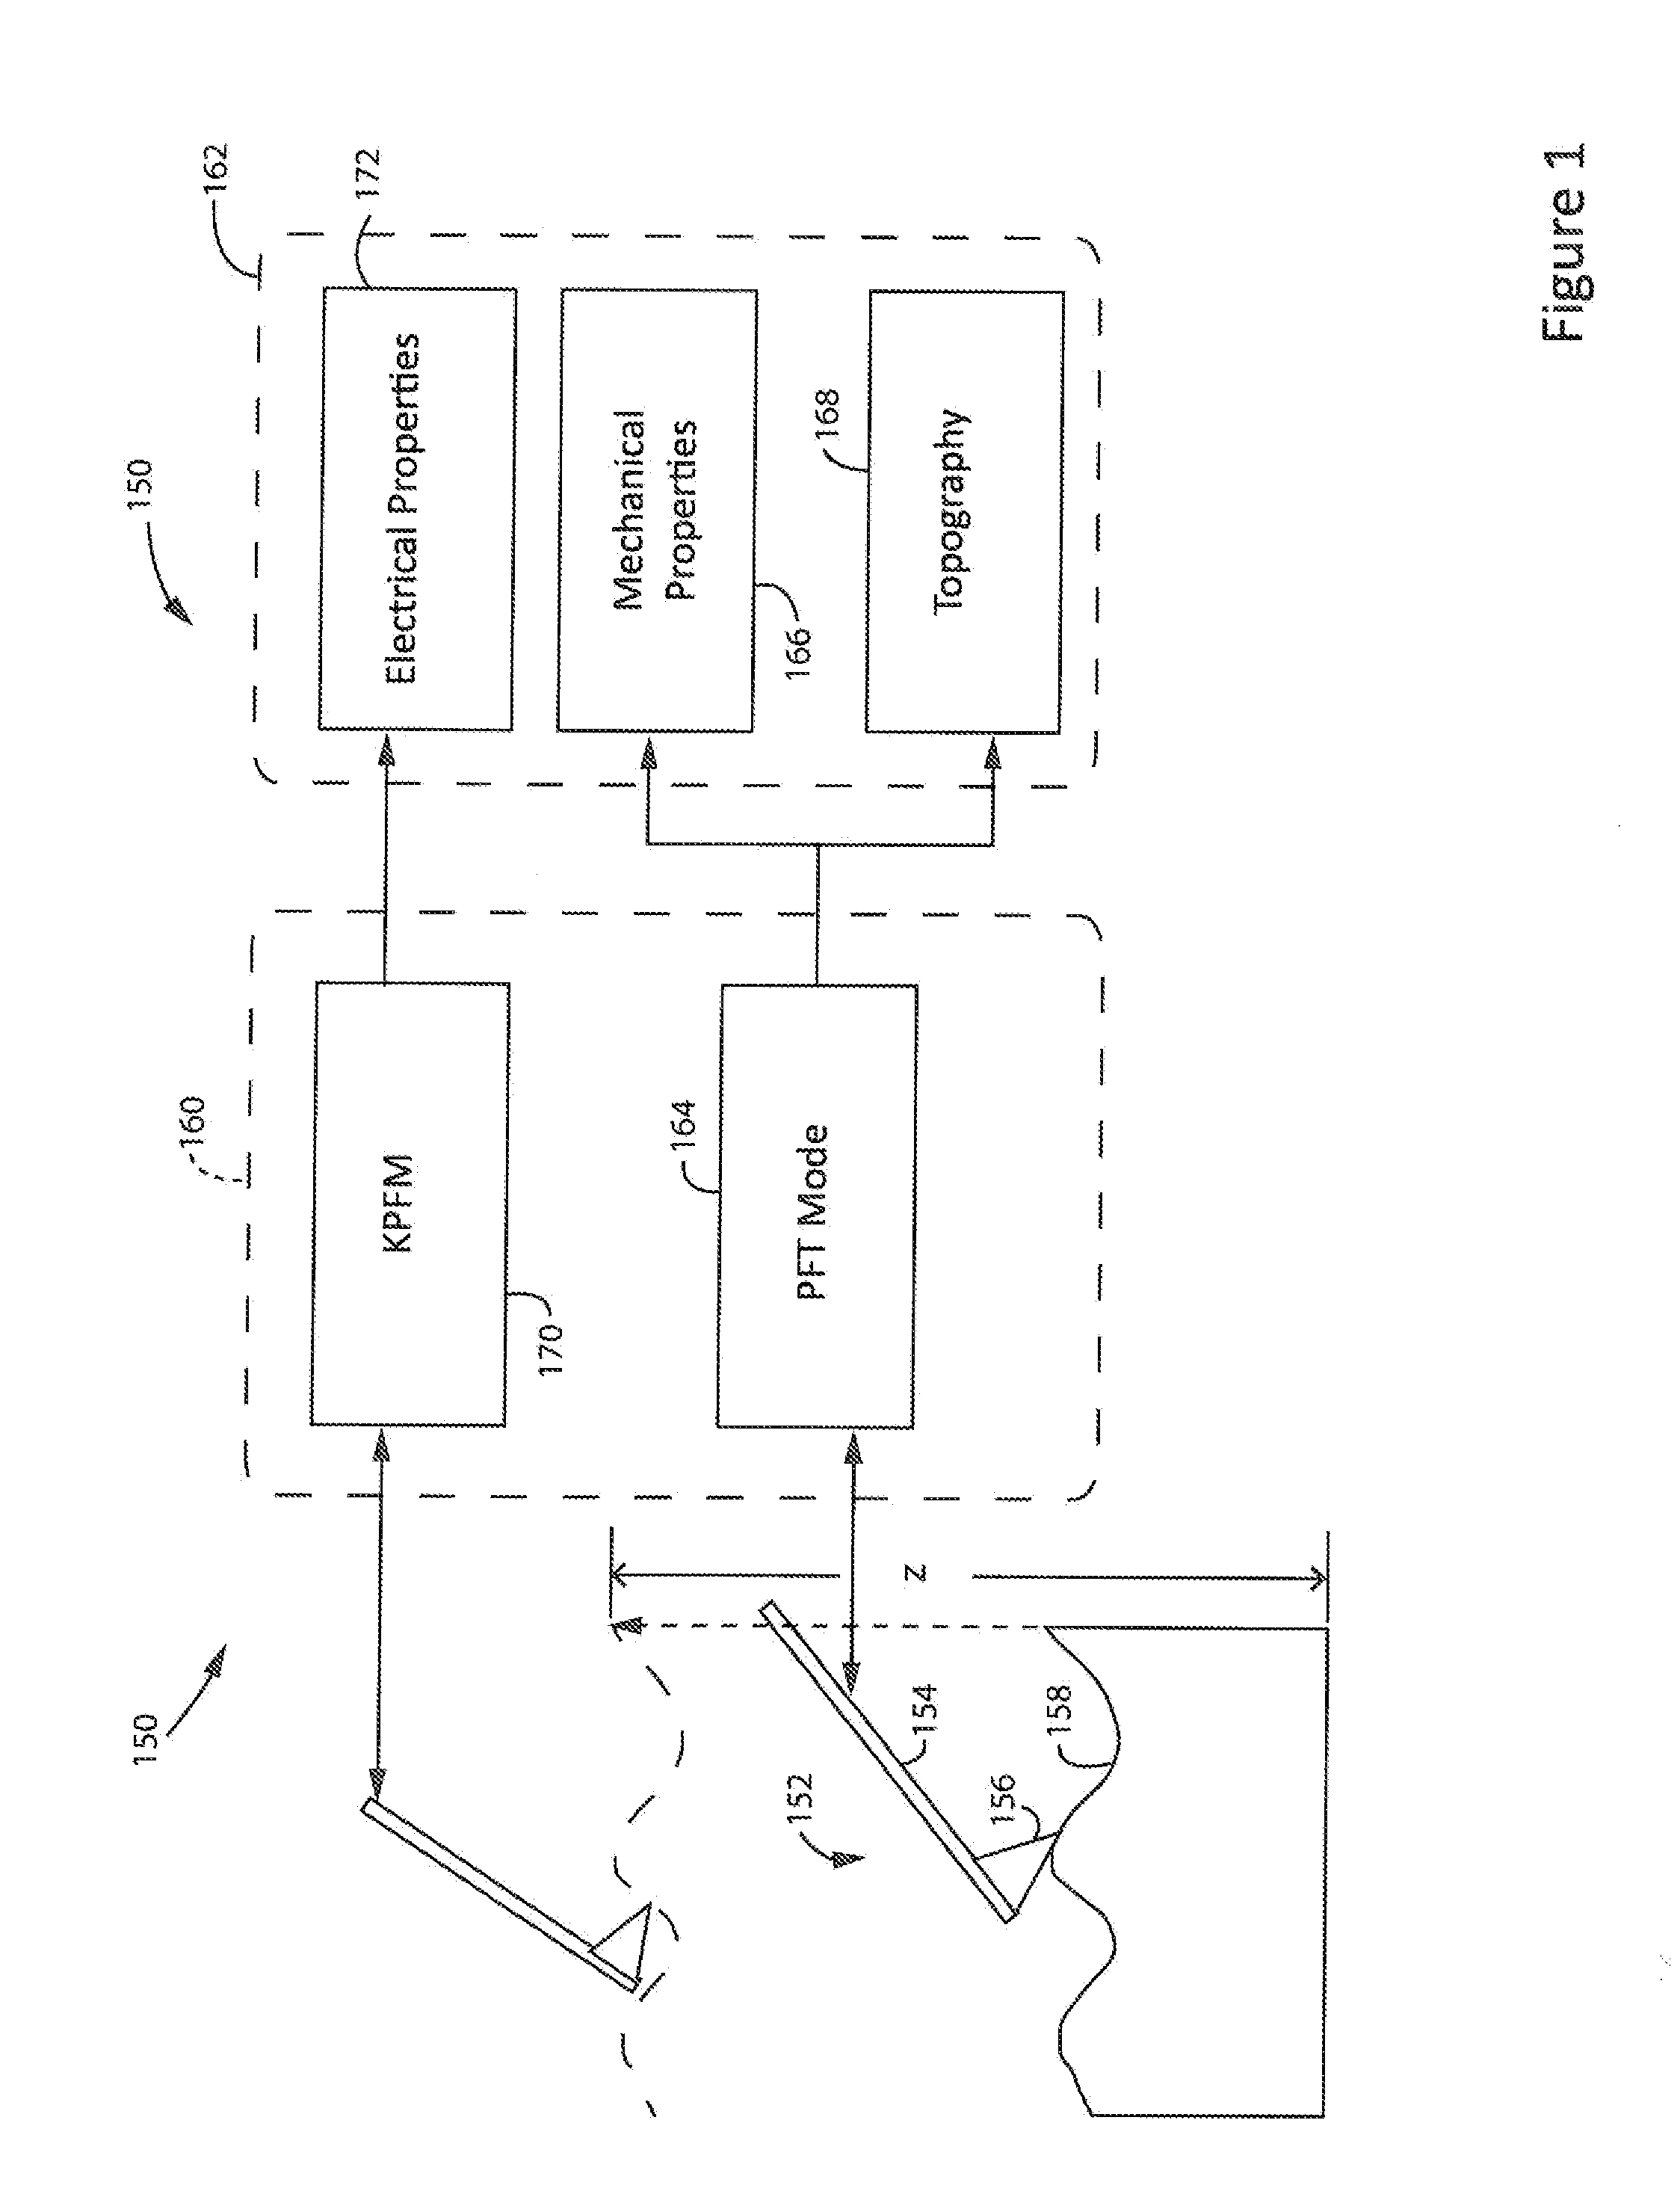 Method and Apparatus of Electrical Property Measurement Using an AFM Operating in Peak Force Tapping Mode